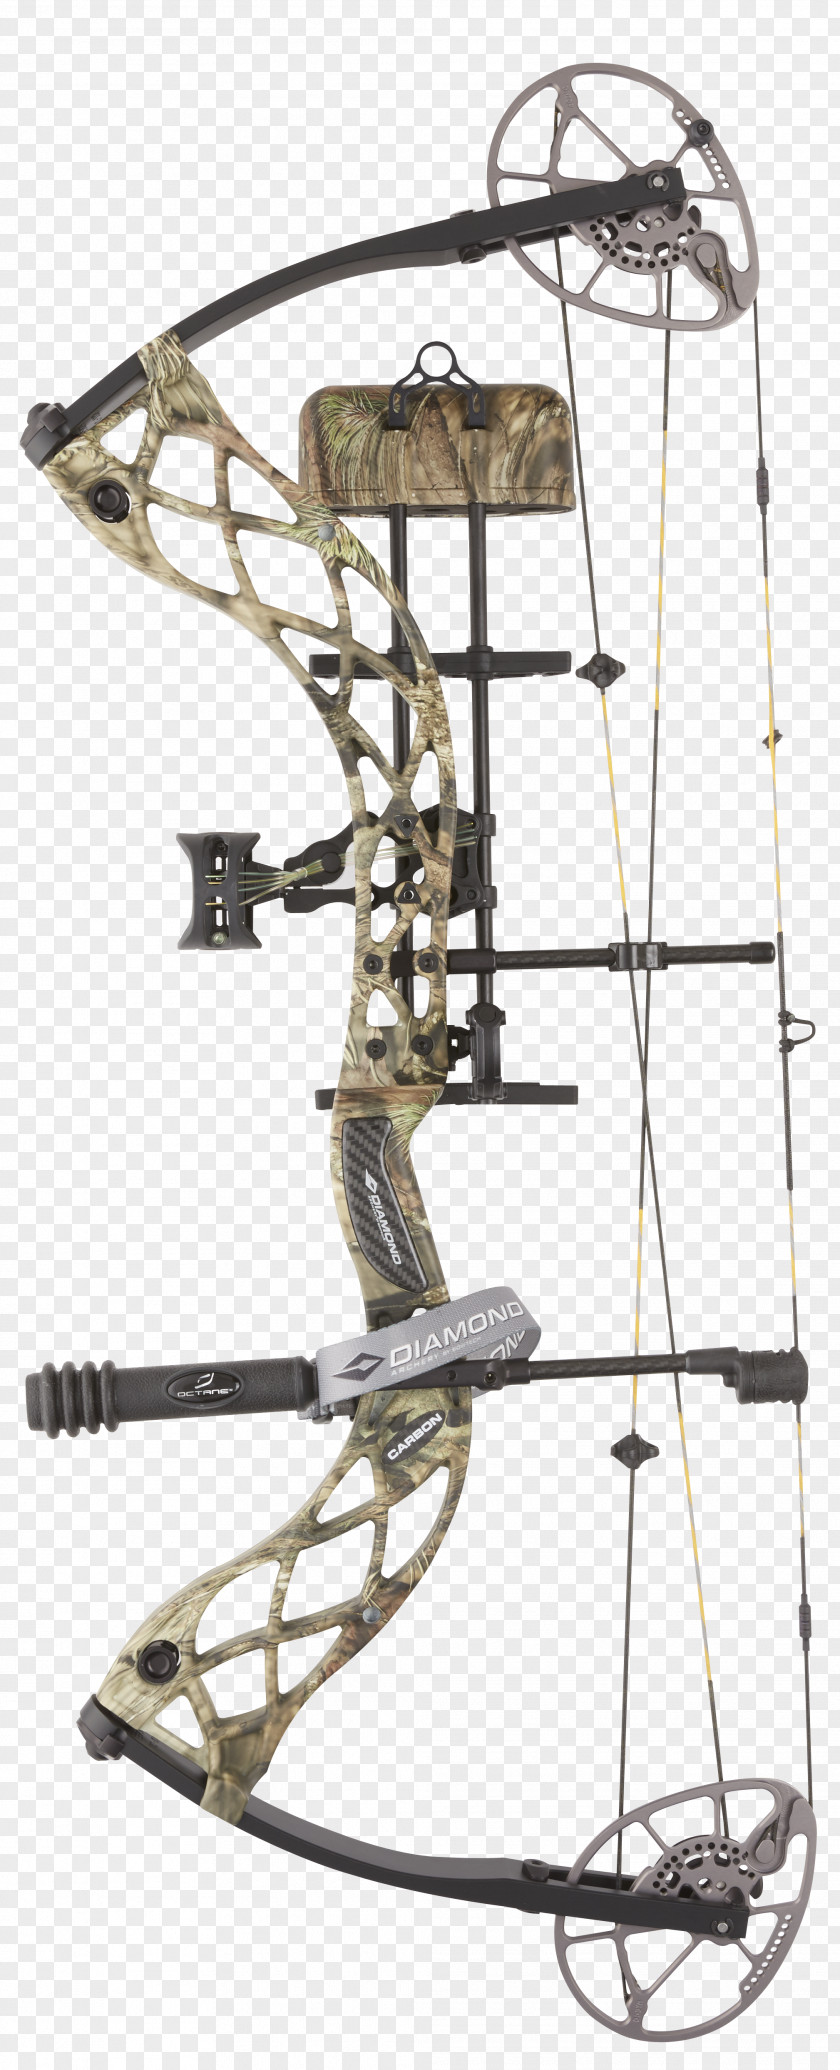 Diamond Compound Bows Bow And Arrow Binary Cam Archery Hunting PNG